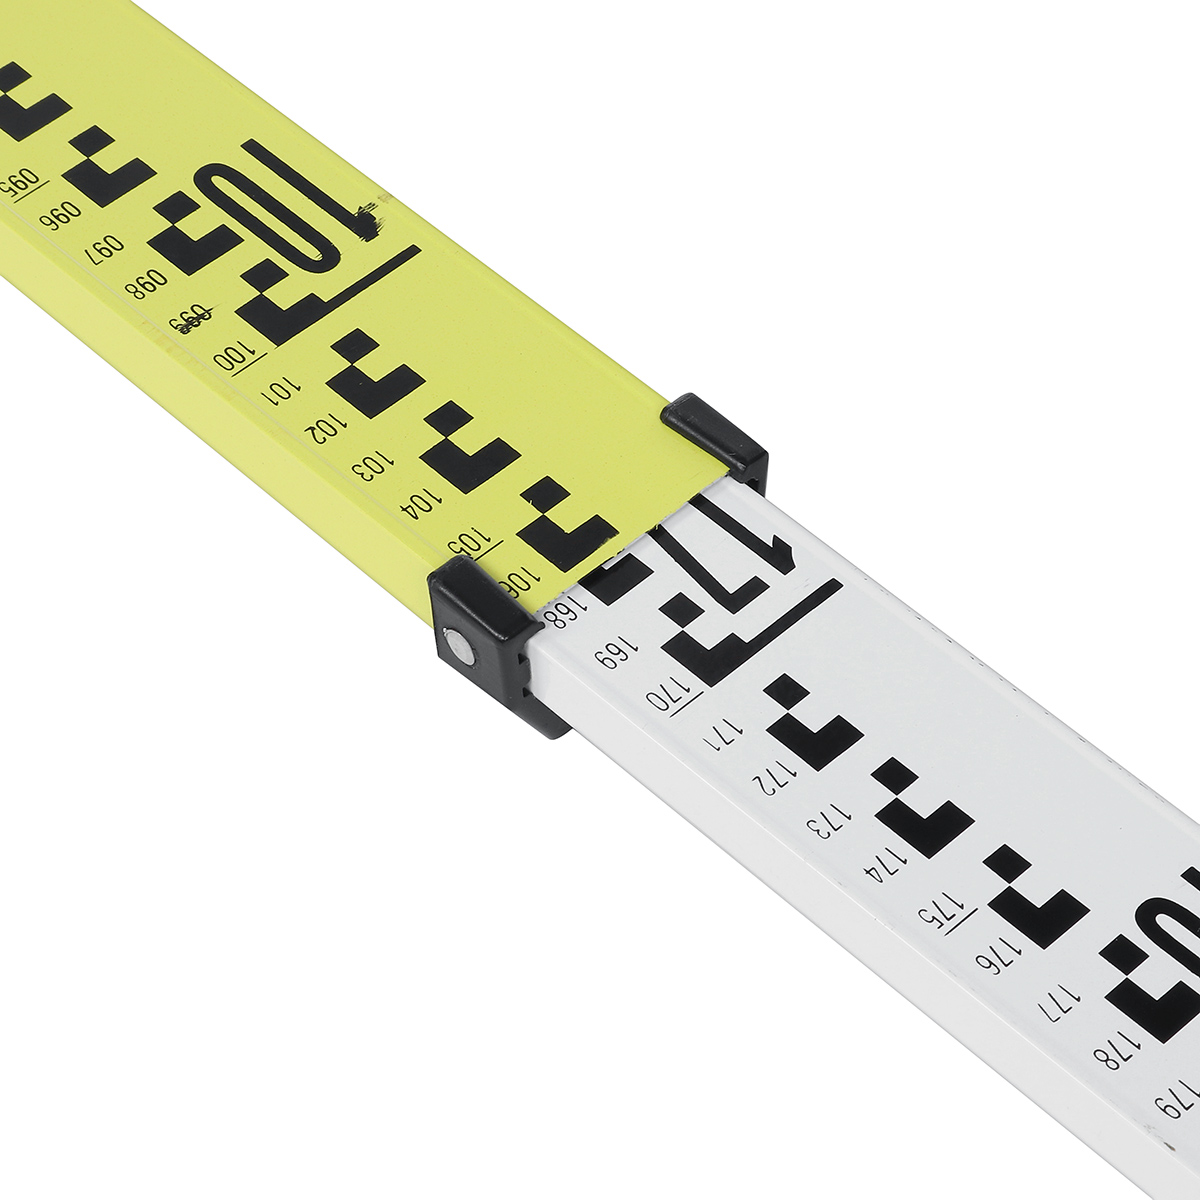 Thickened-Aluminum-Alloy-3-Meters-5-Meters-7-Meters-Tower-Ruler-Ruler-Measuring-Tool-Thickened-Fixed-1895358-9